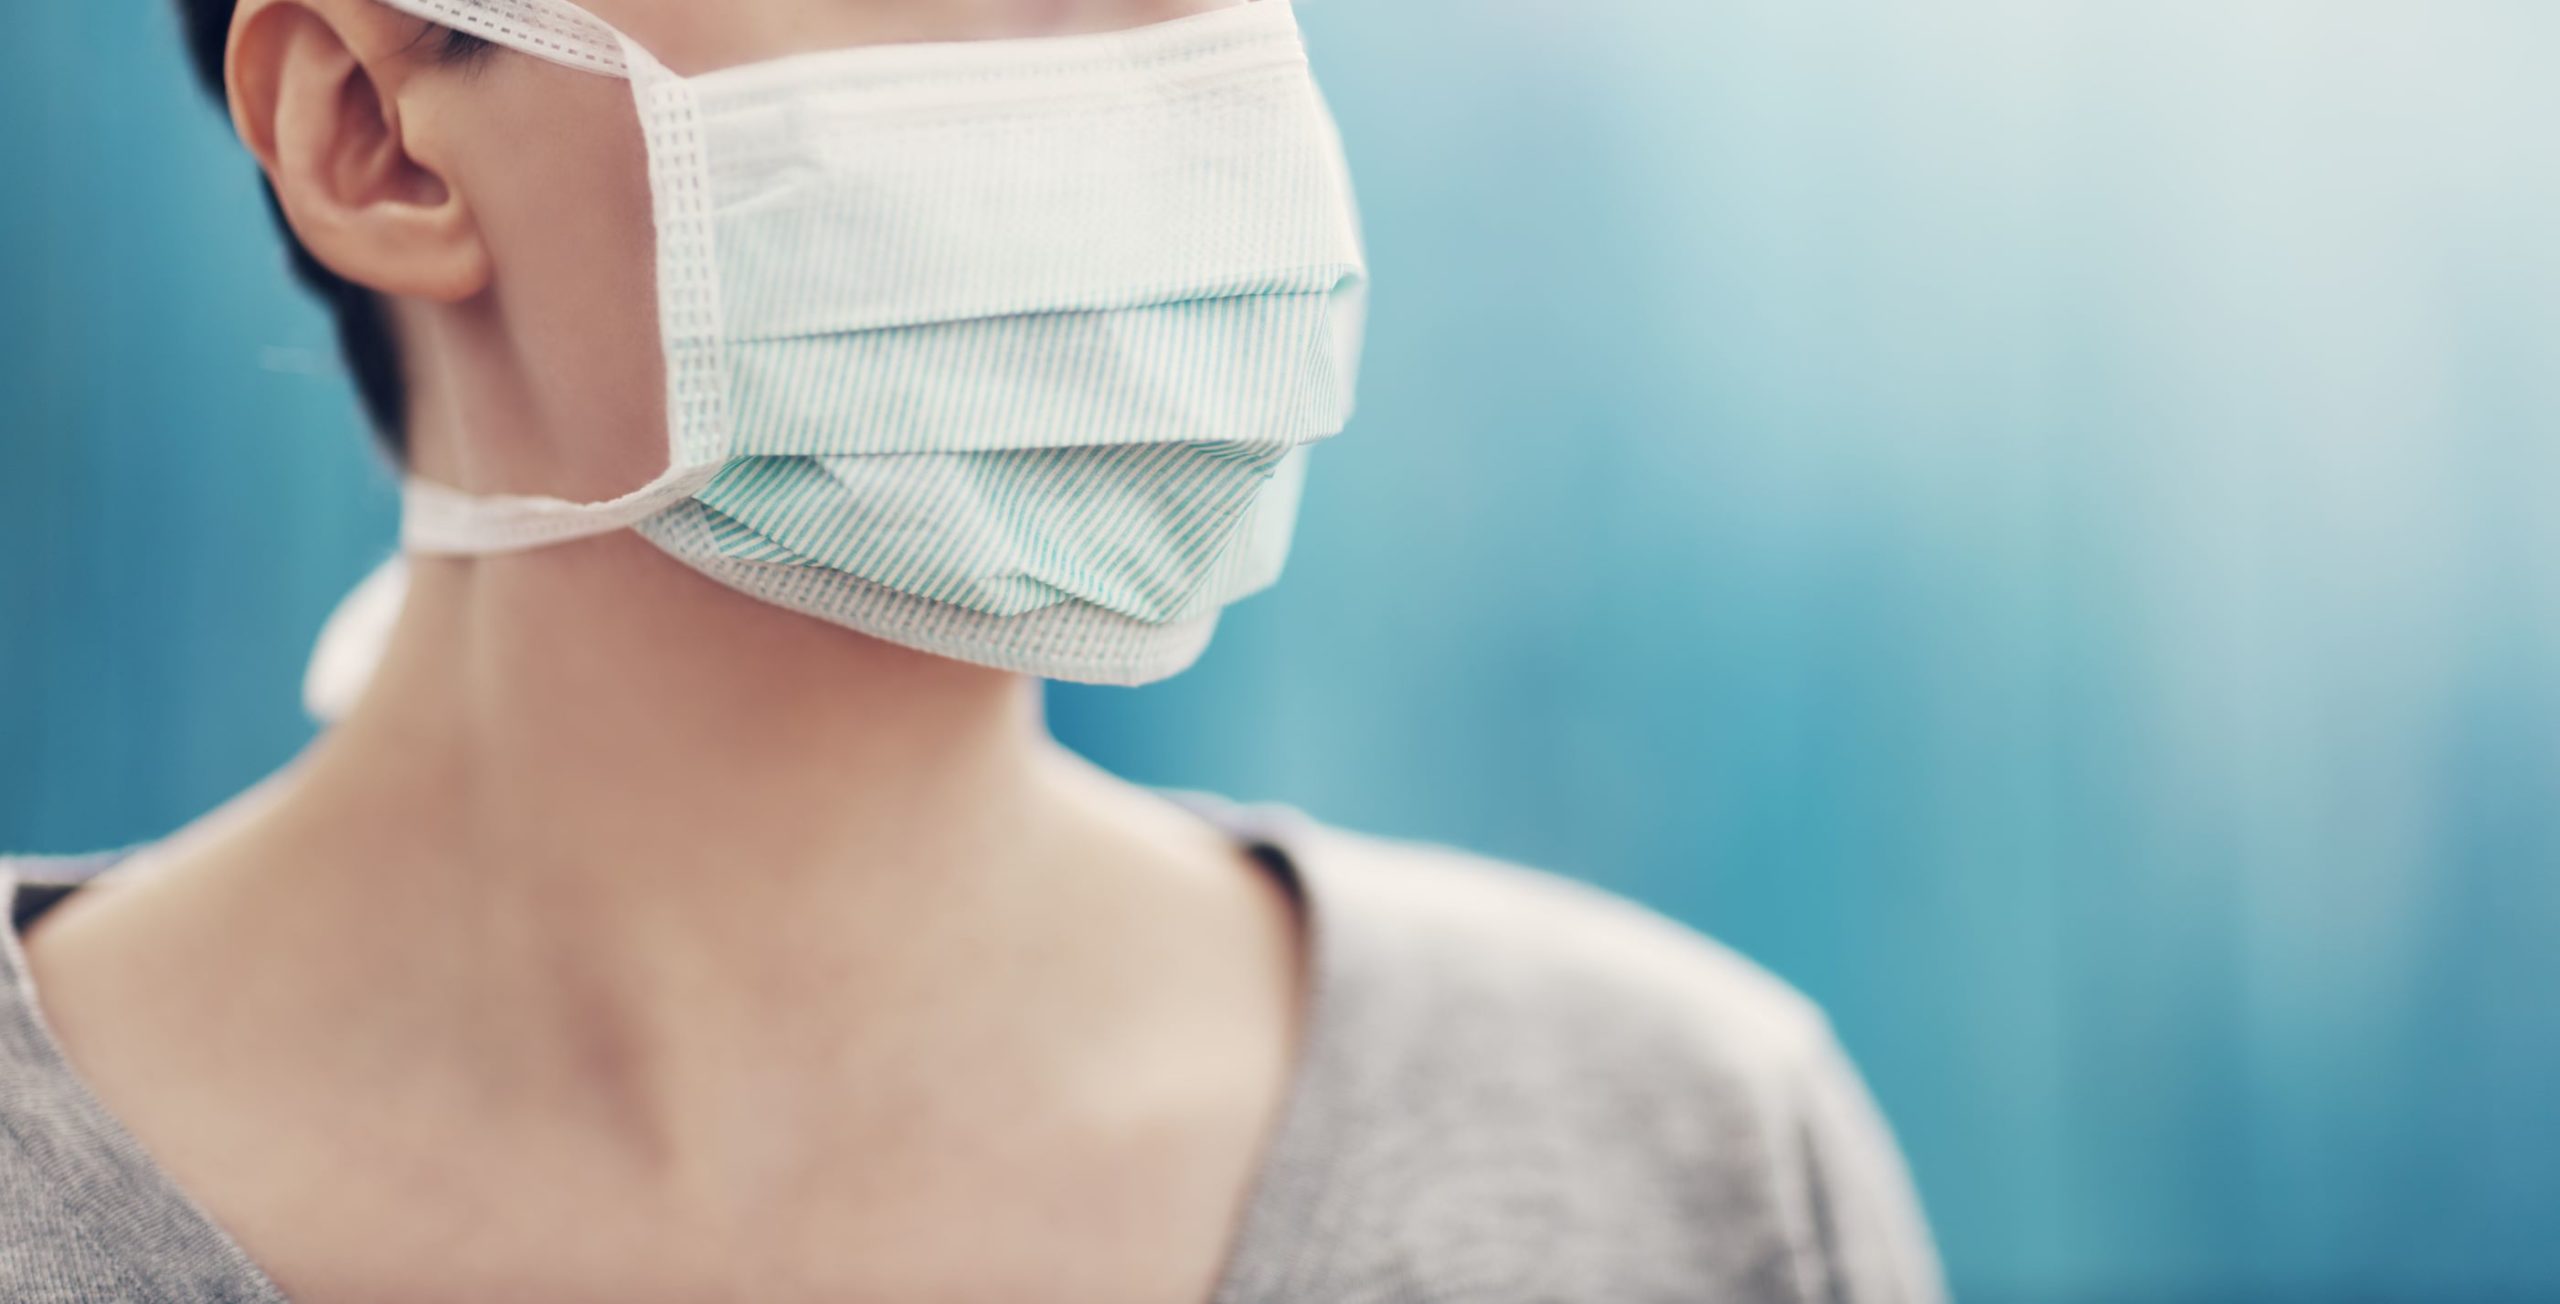 When it comes to the coronavirus, heart patients may be especially vulnerable to the symptoms. This image shows a woman wearing a face mask.